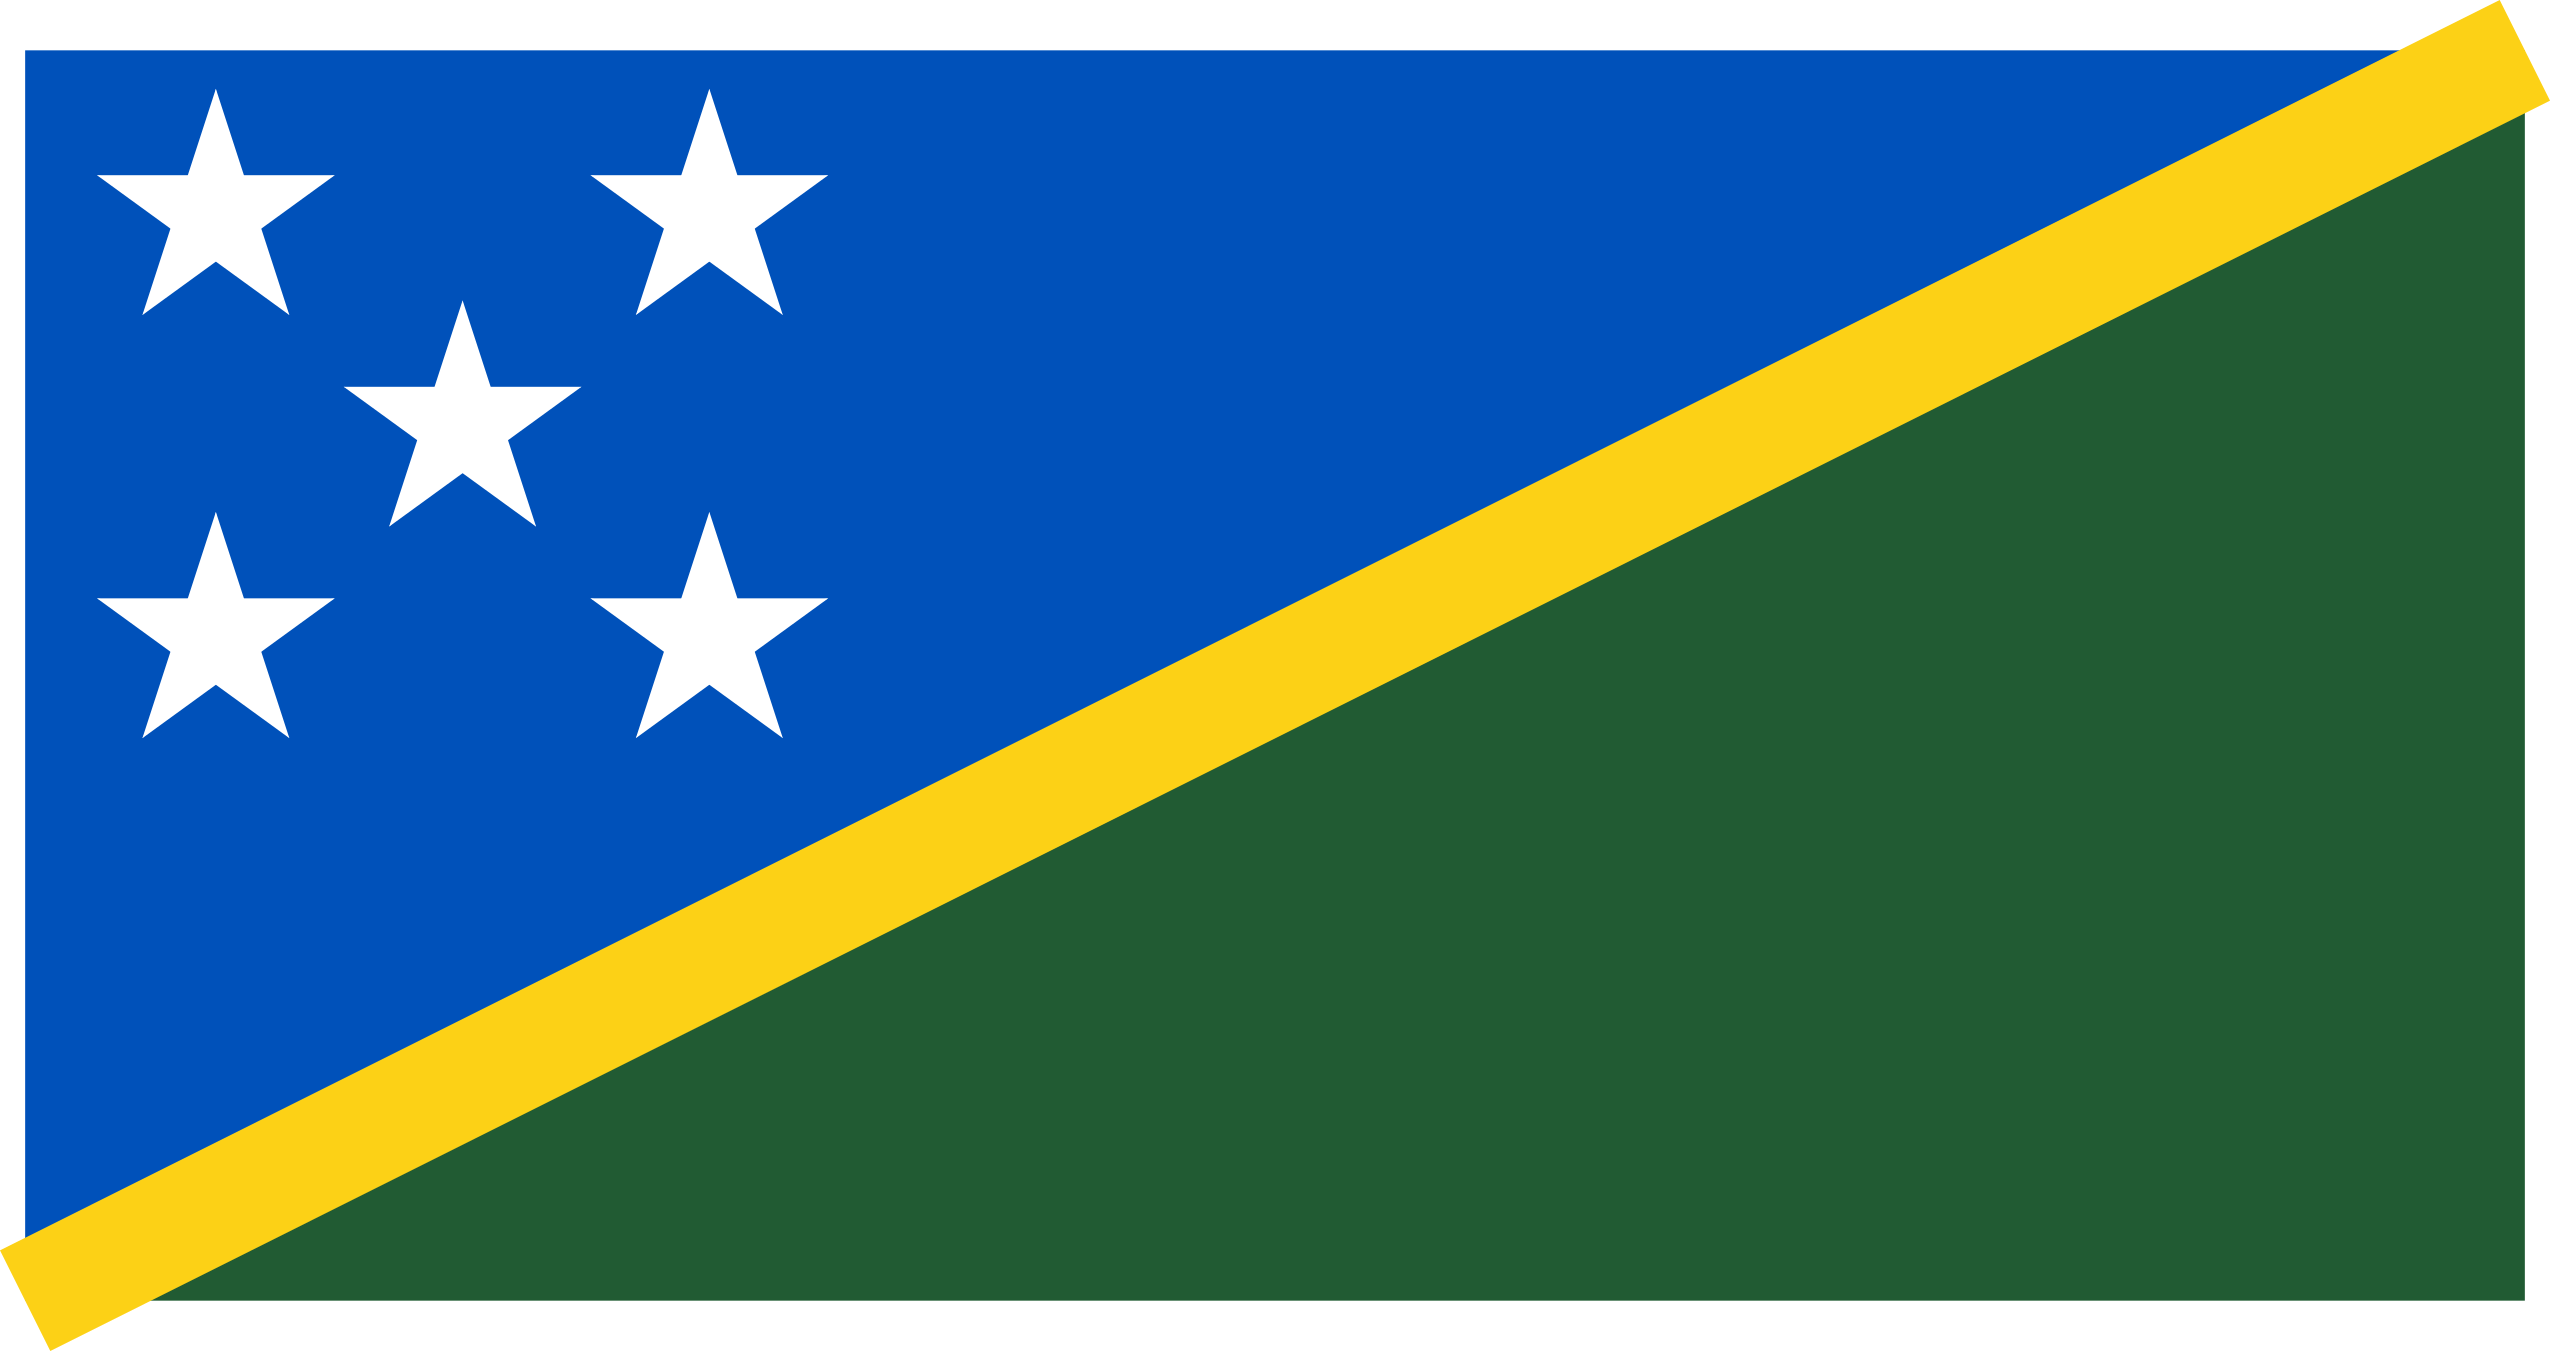 The Solomon Islands Flag Image - Free Download